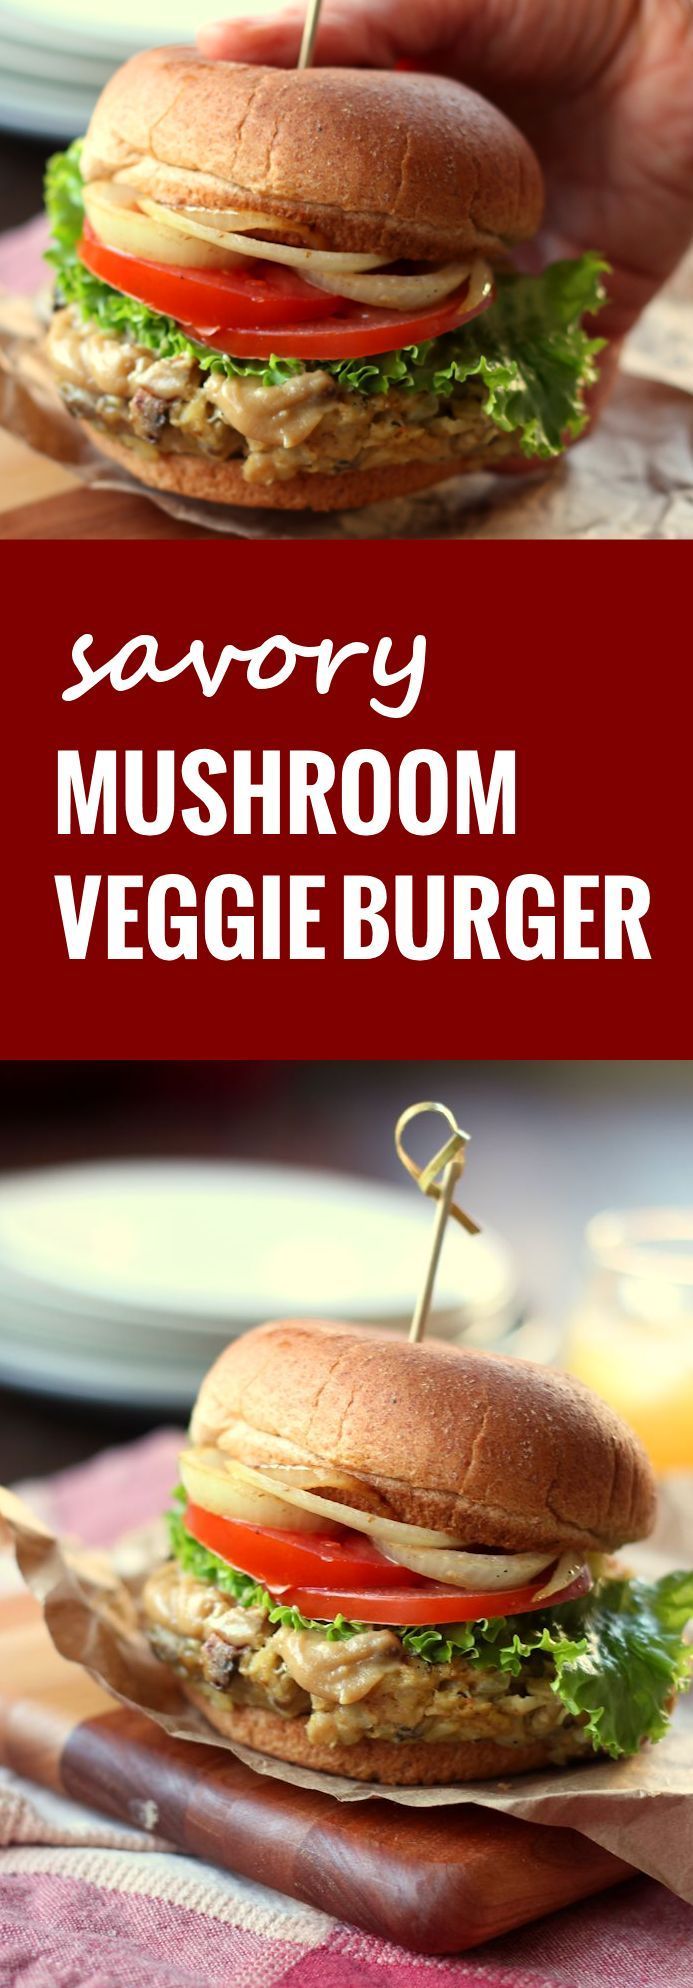 These vegan mushroom burgers are made with a savory blend of sautéed mushrooms, white beans and tahini, grilled and topped with